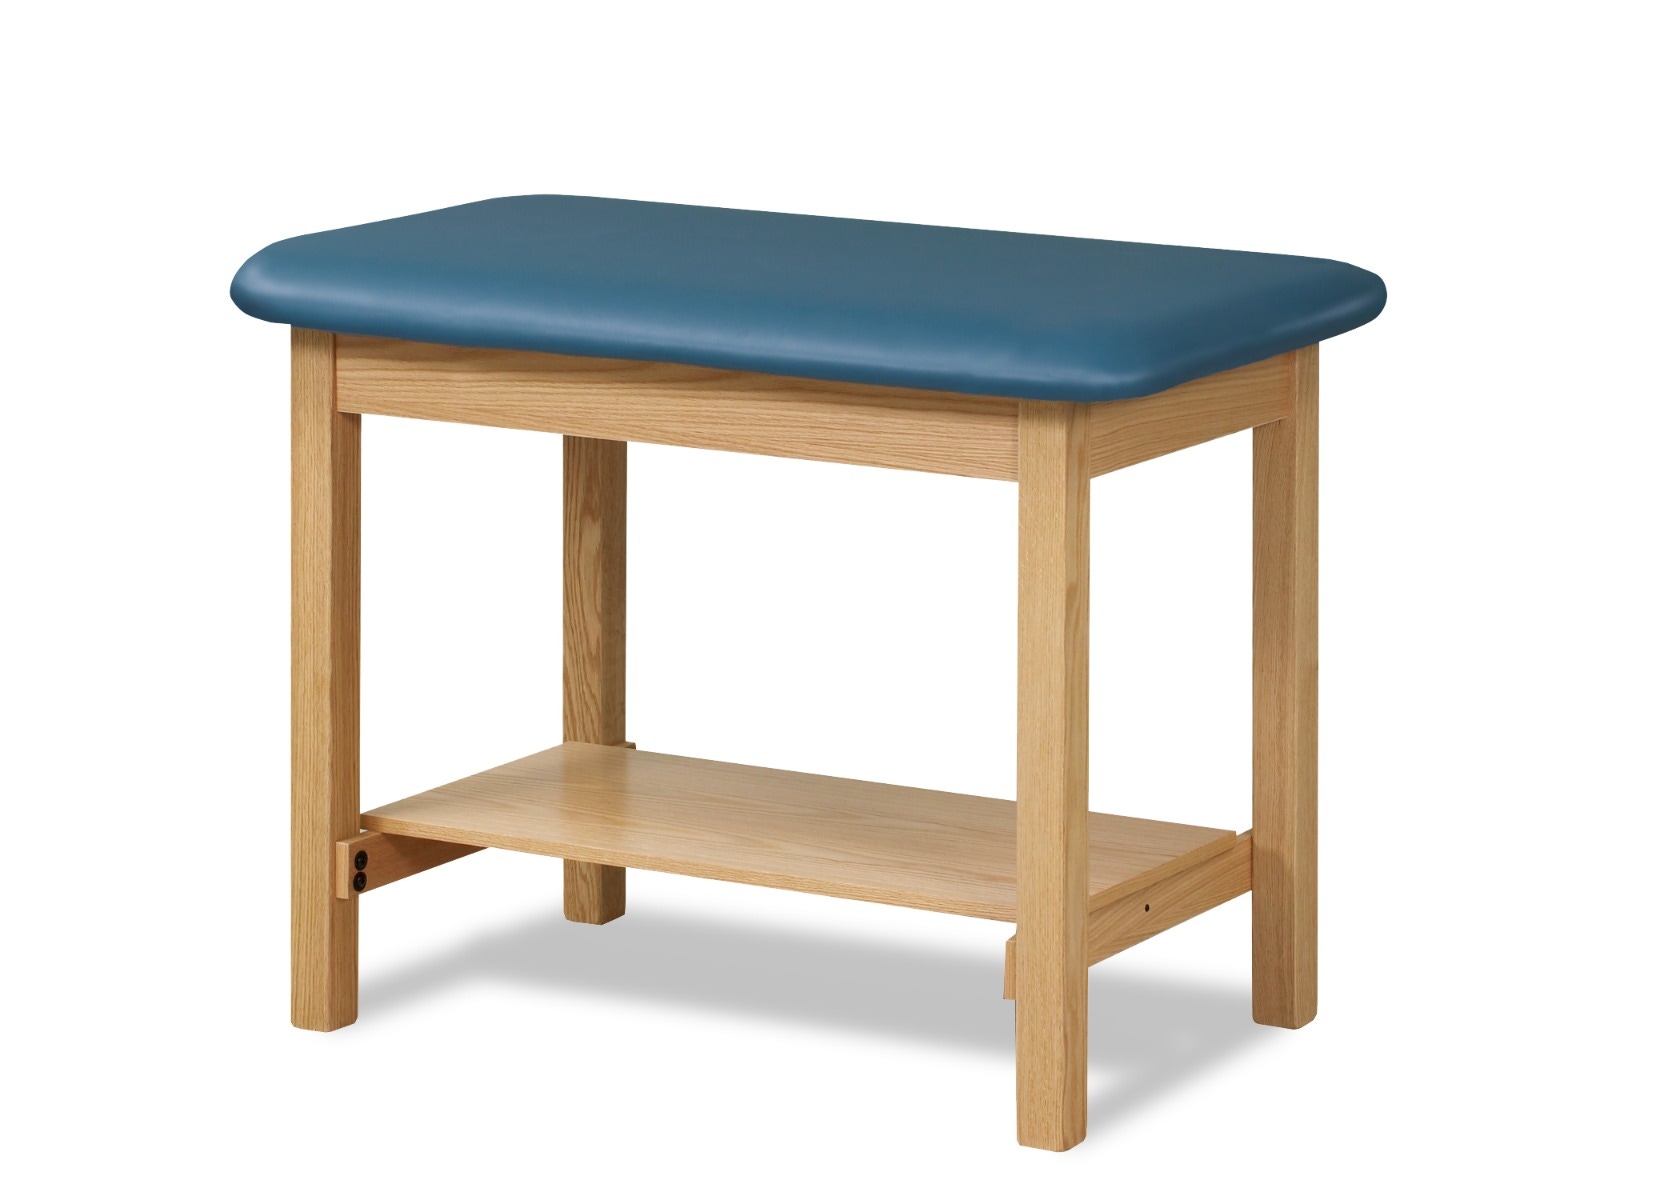 Clinton Industries Classic Series Taping Table